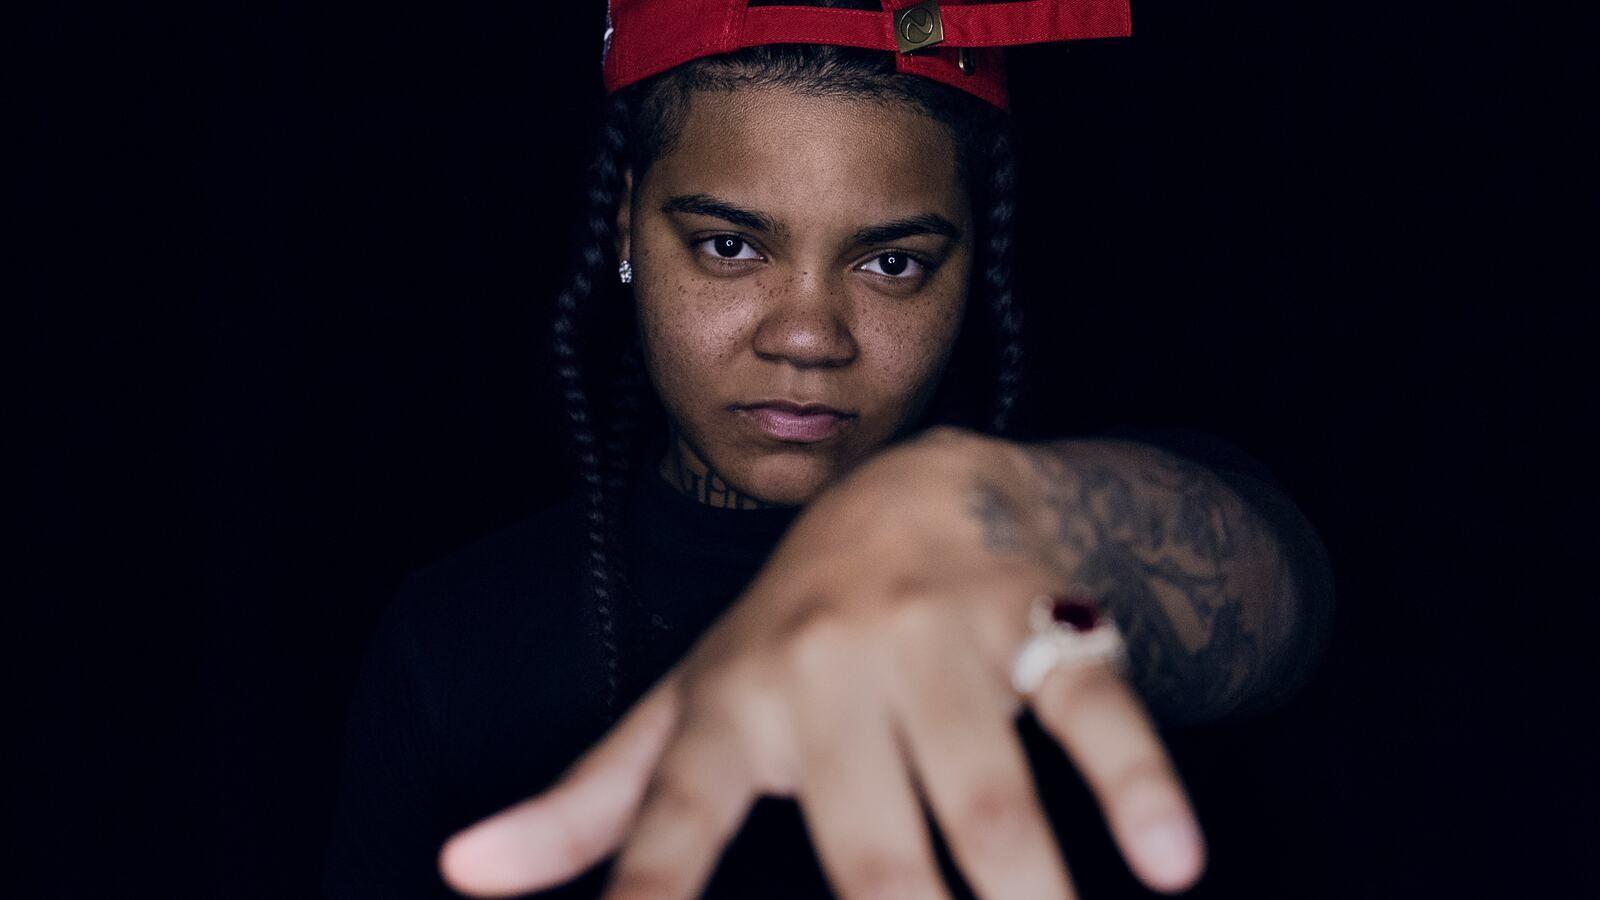 Who is American rapper Young M.A?